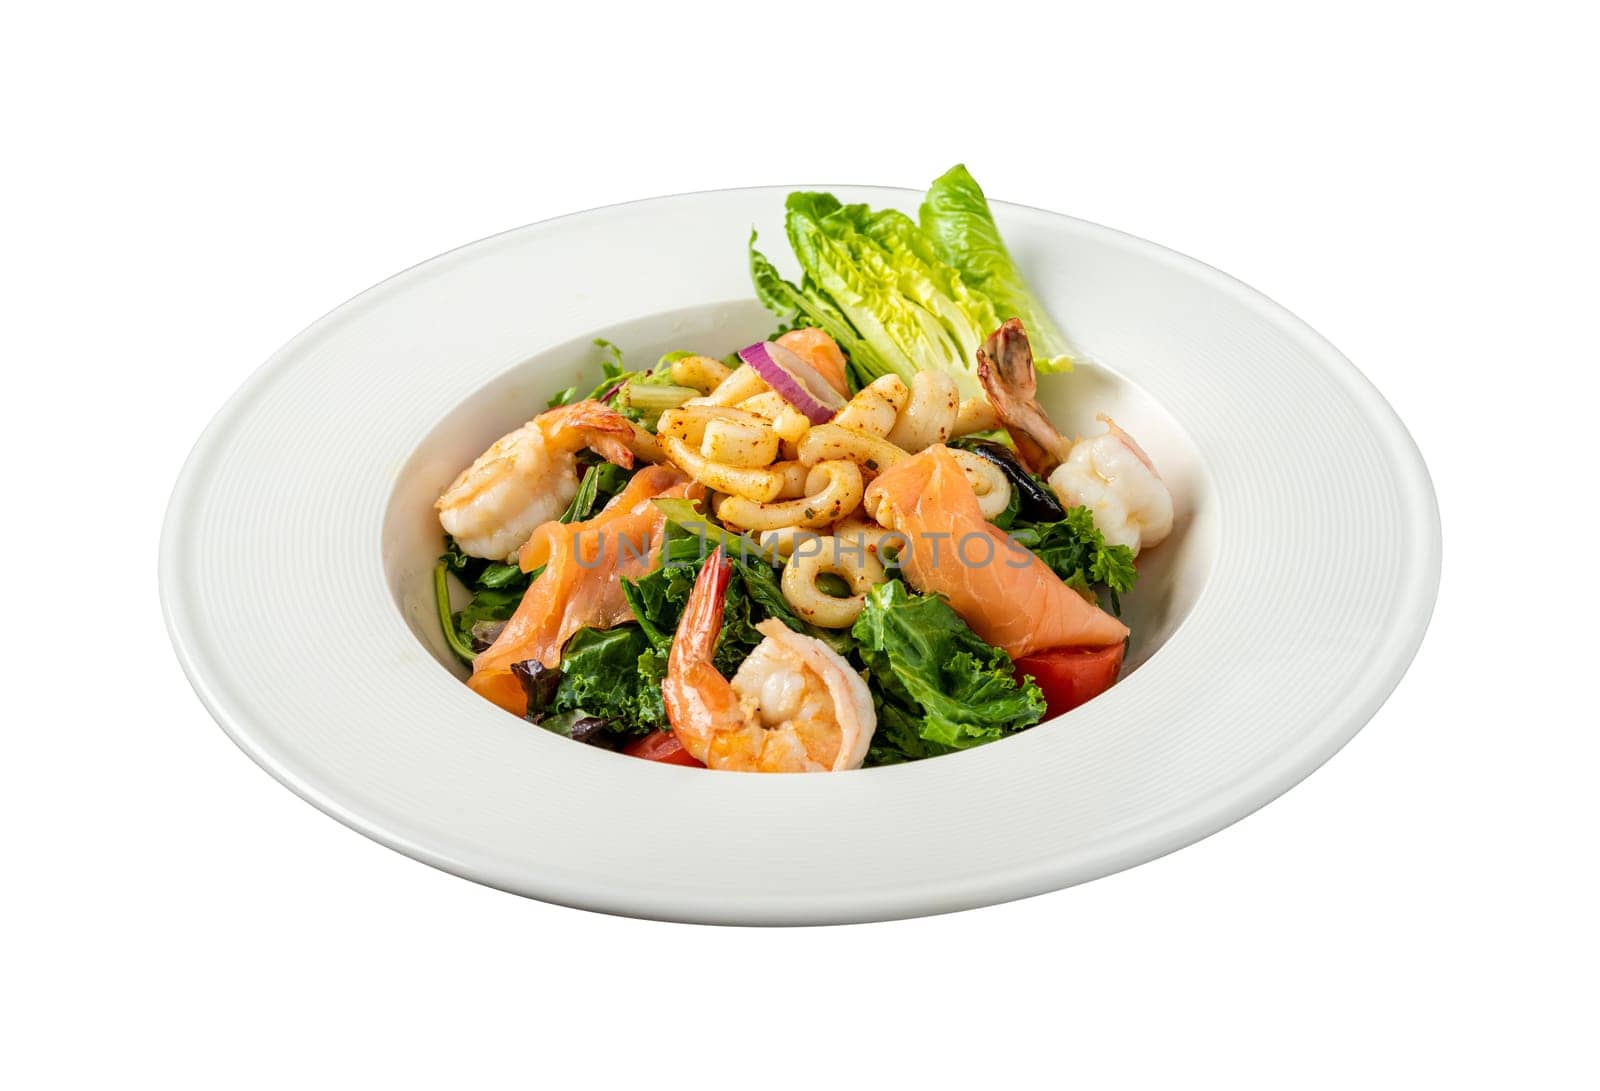 Cold Seafood Salad with Shrimp, Tuna and Octopus